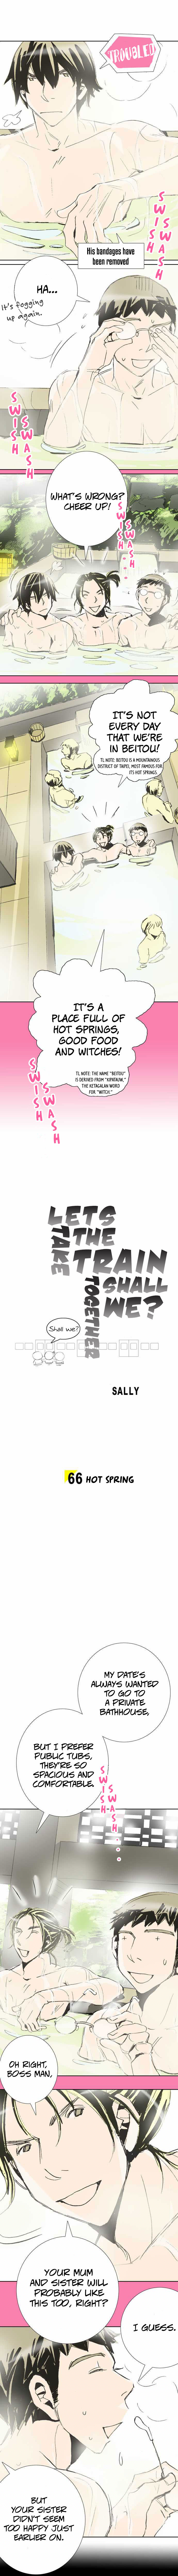 Let's Take the Train Together, Shall We? 66